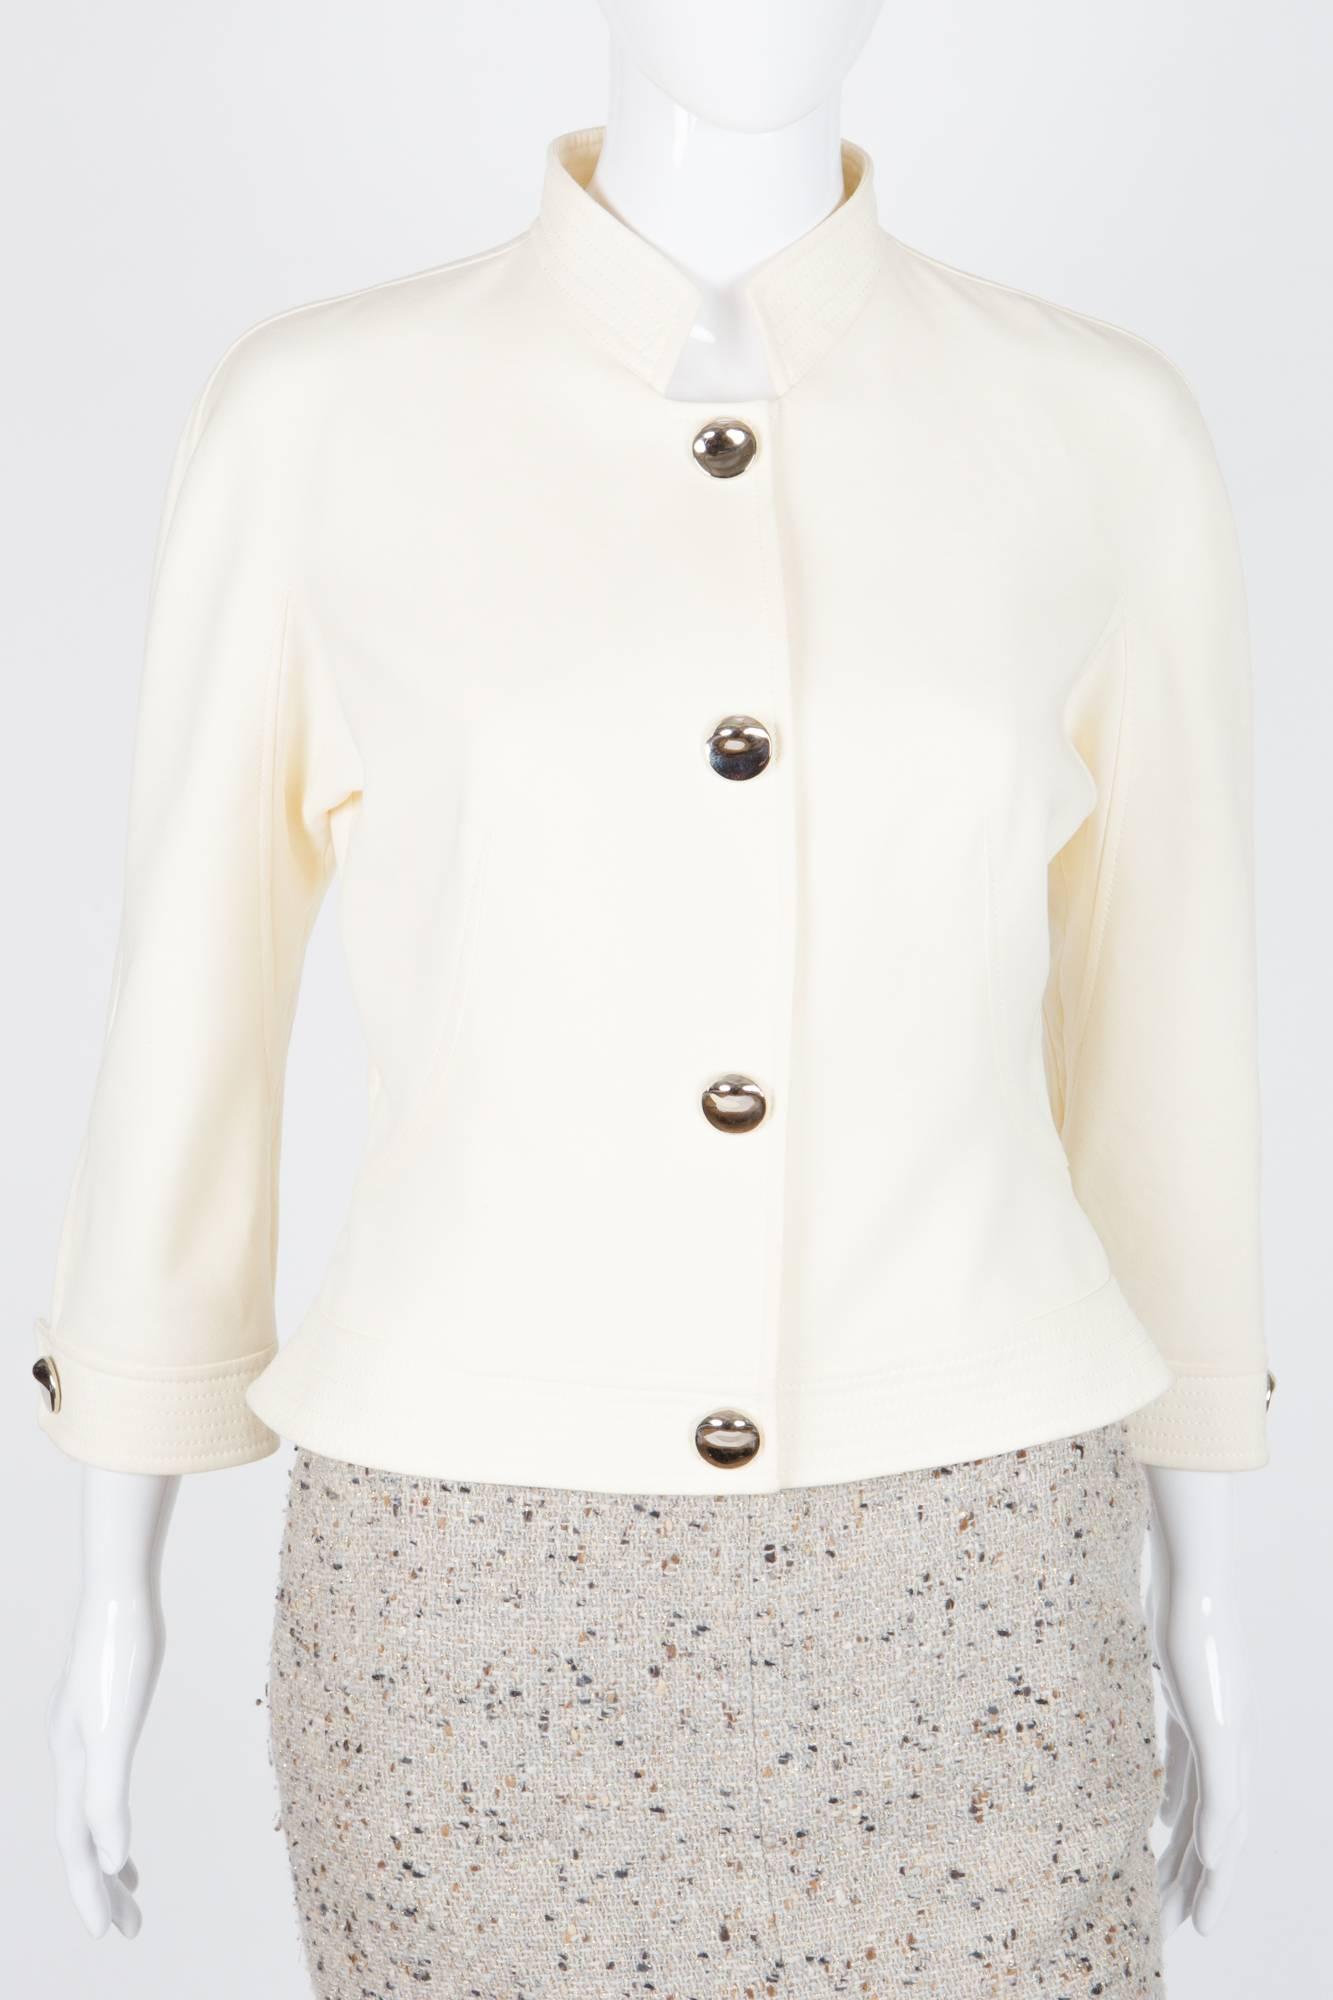 Thierry Mugler Couture Runway cream cotton jacket featuring silver tone fancy decorative buttons with under front snap button, a fitted waist, 3/4 sleeve length.
In excellent vintage condition. Made in France.
We guarantee you will receive this